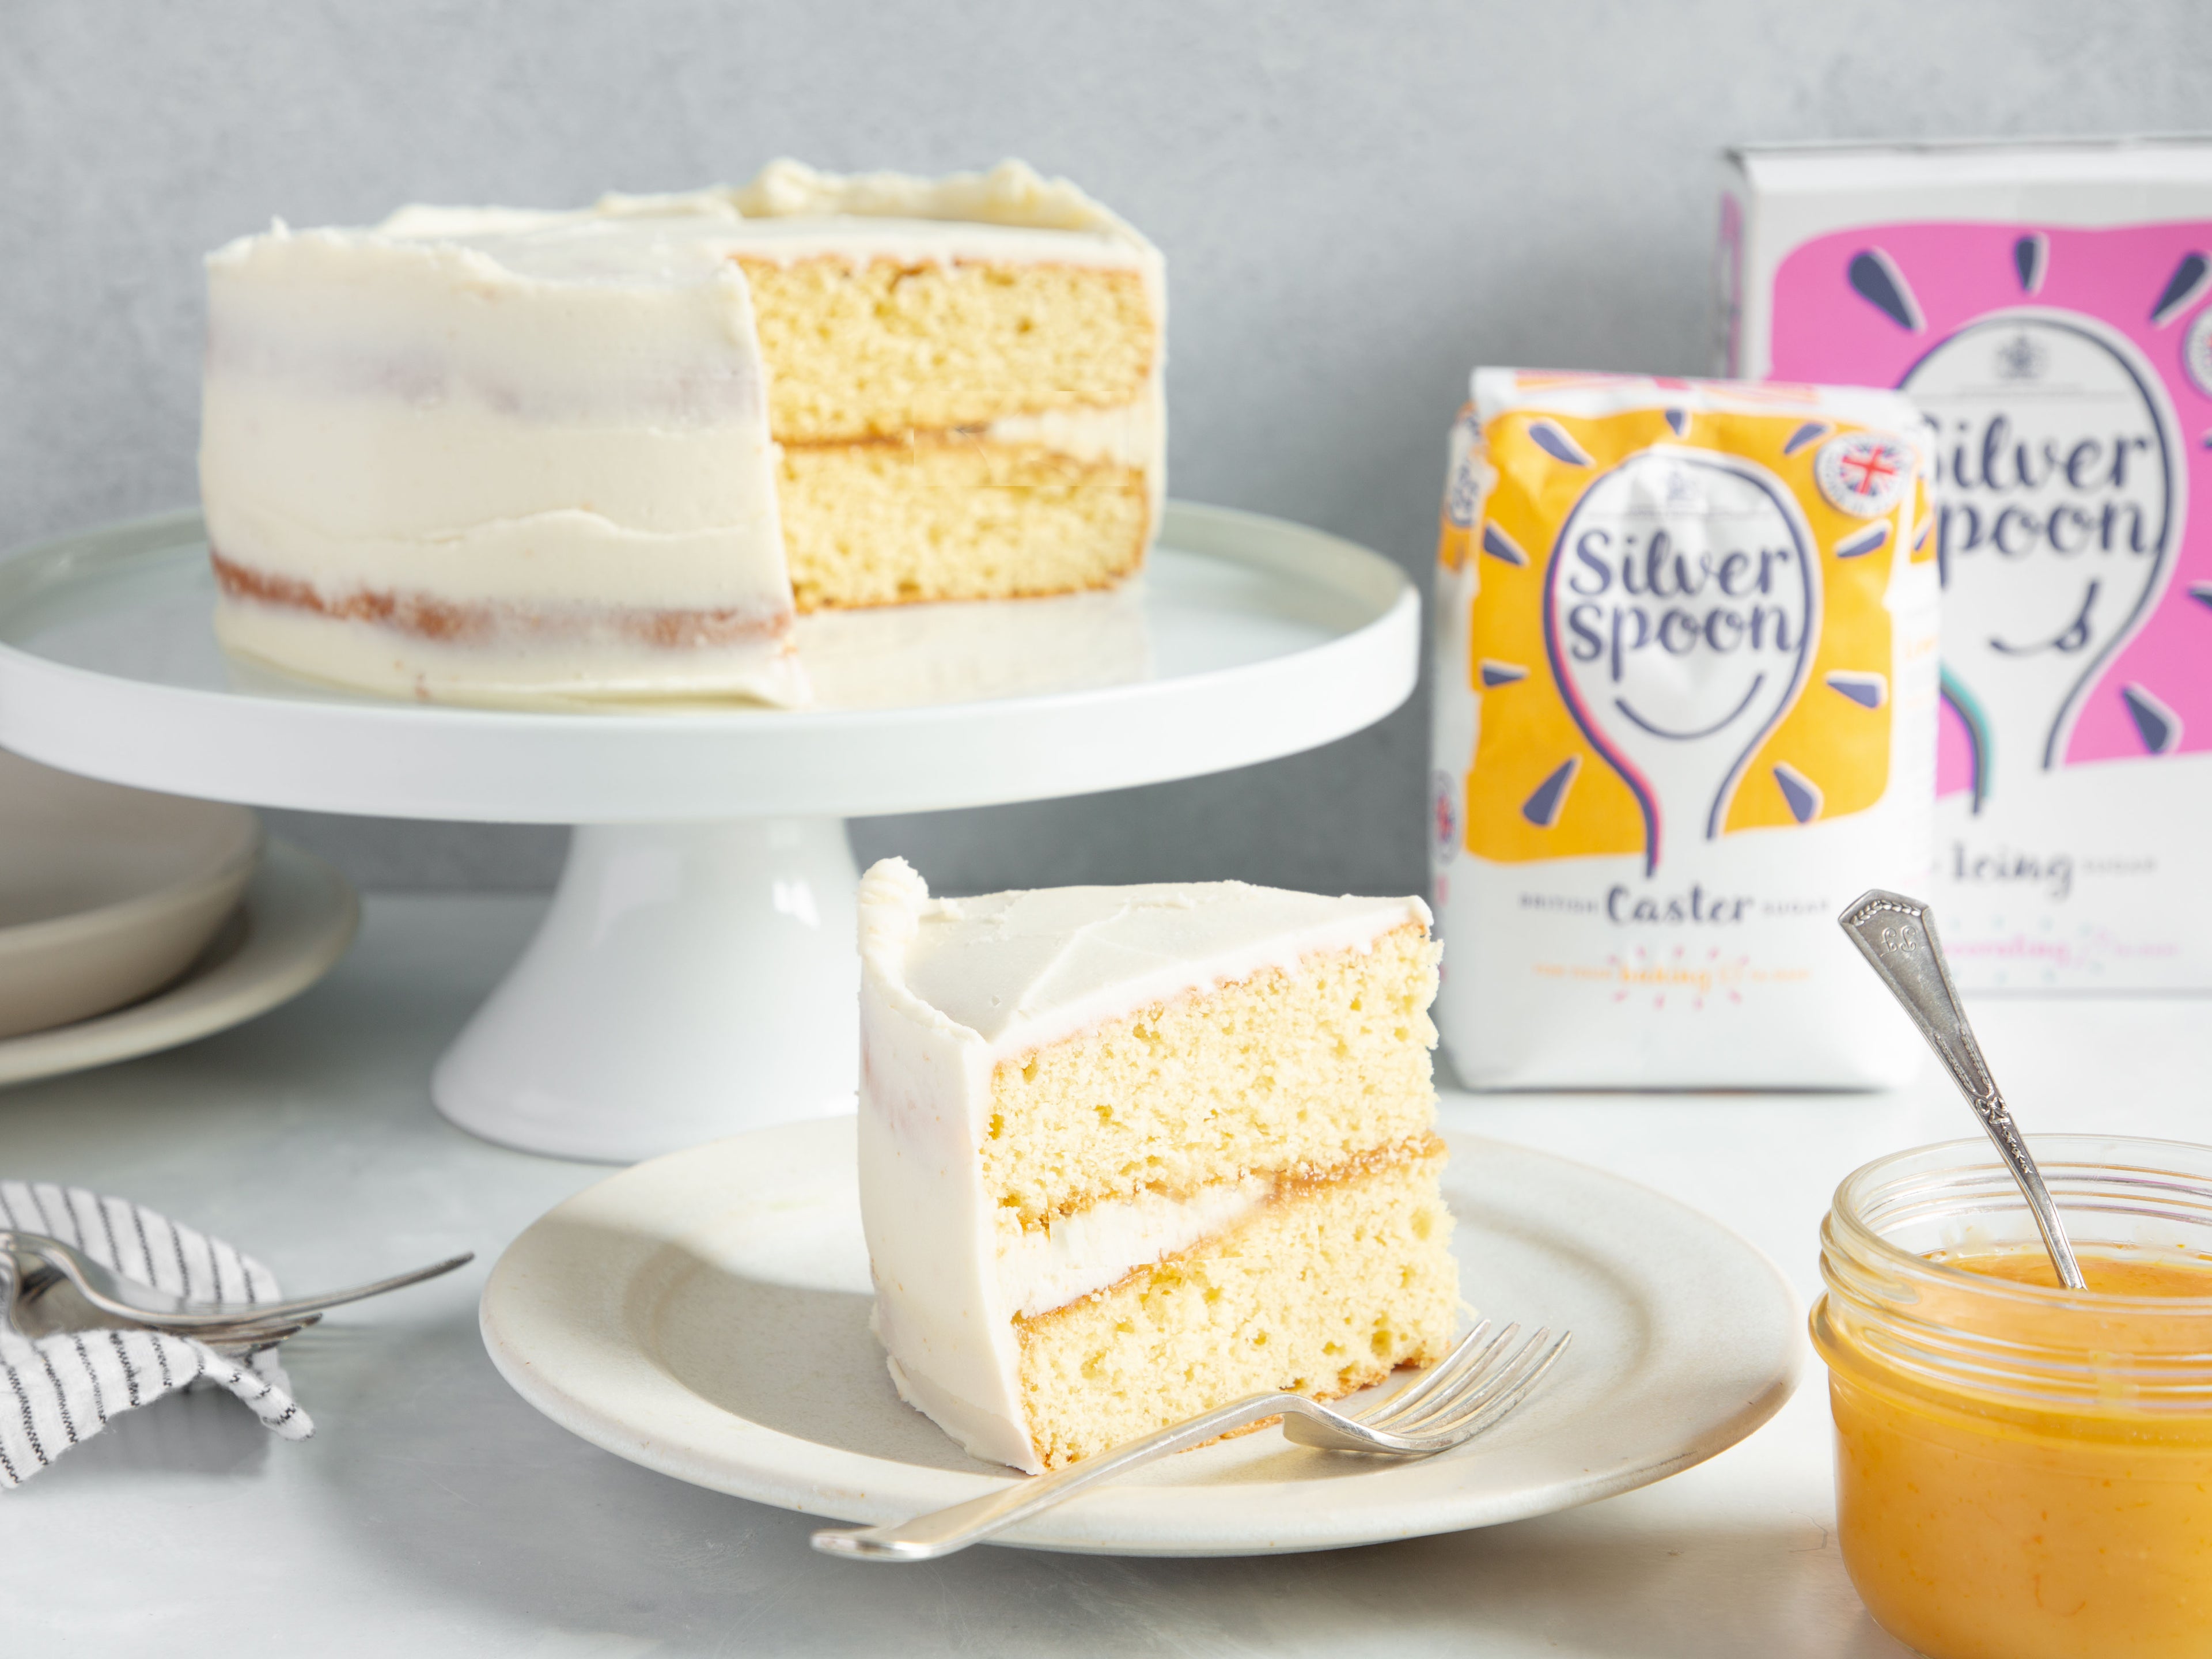 Classic Lemon Cake on a cake stand with a slice cut out showing the lemon filling next to a bag of Silver Spoon Icing and Caster sugar